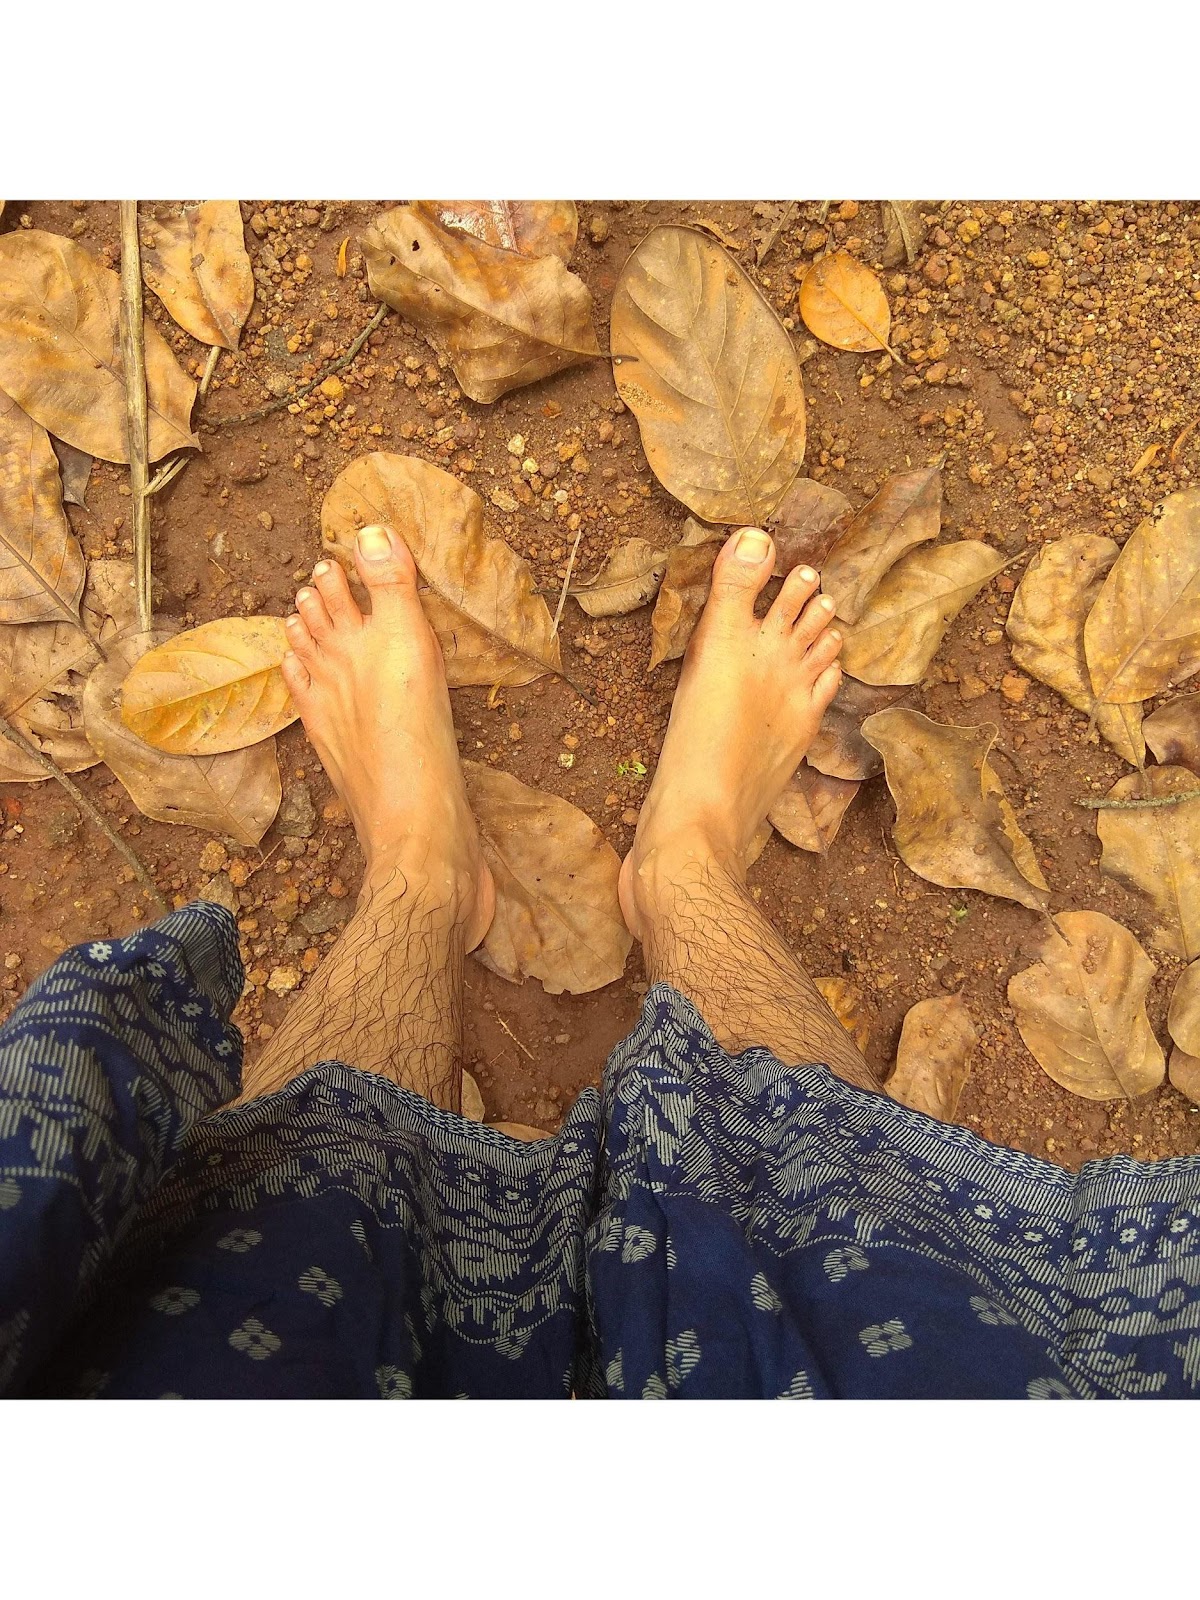 Photo Essay: #WomenHaveLegs â€“ And The Last We Checked, They Are Hairy Too |  Feminism in India